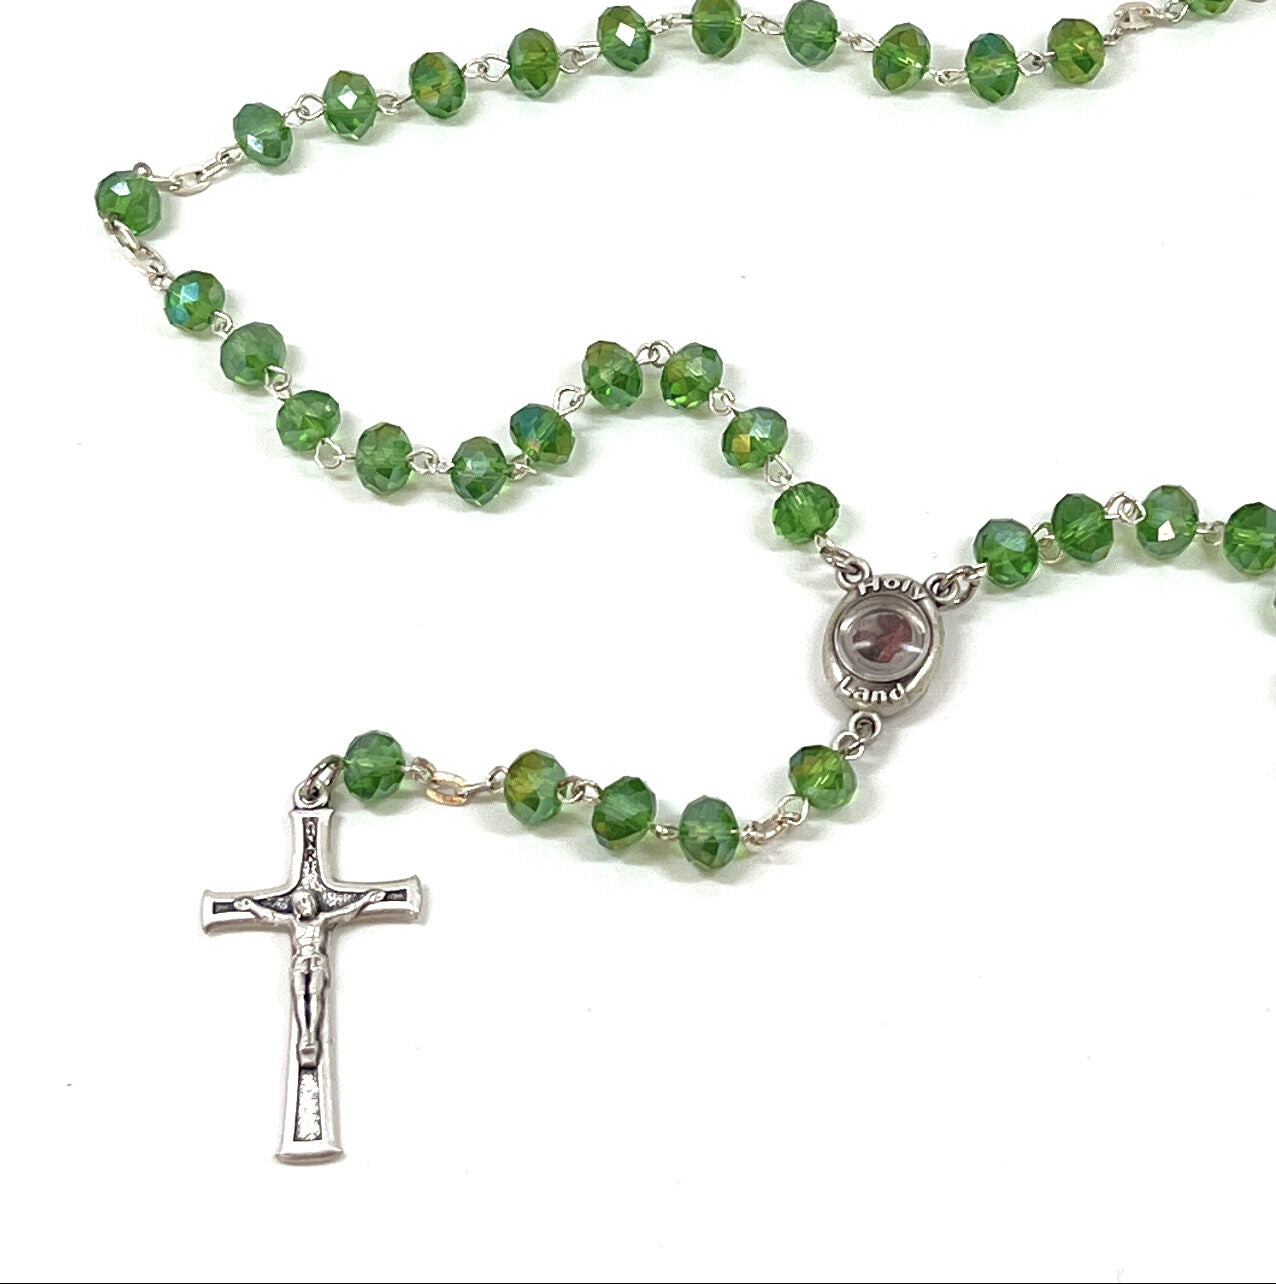 Rosary with Green Crystal Beads, Metal Chain with 2" Crucifix, Made in Holy Land